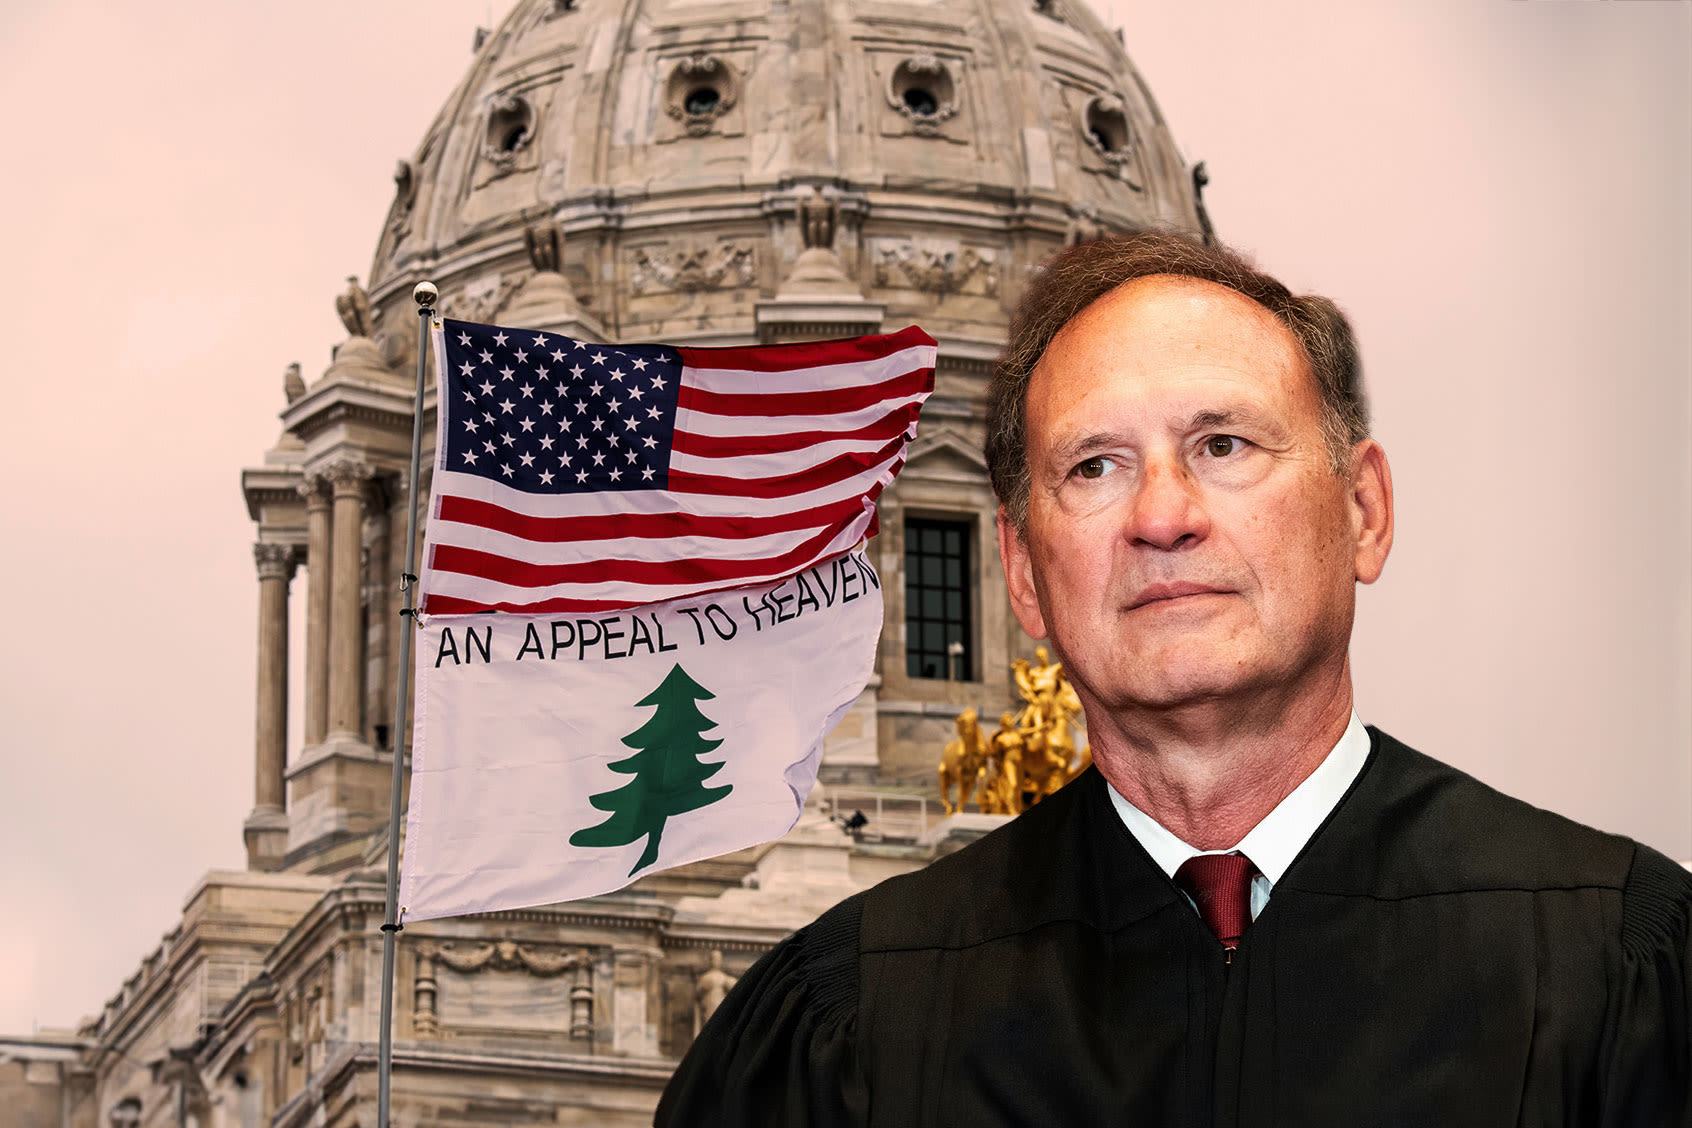 An appeal to heaven: Find Sam Alito another job